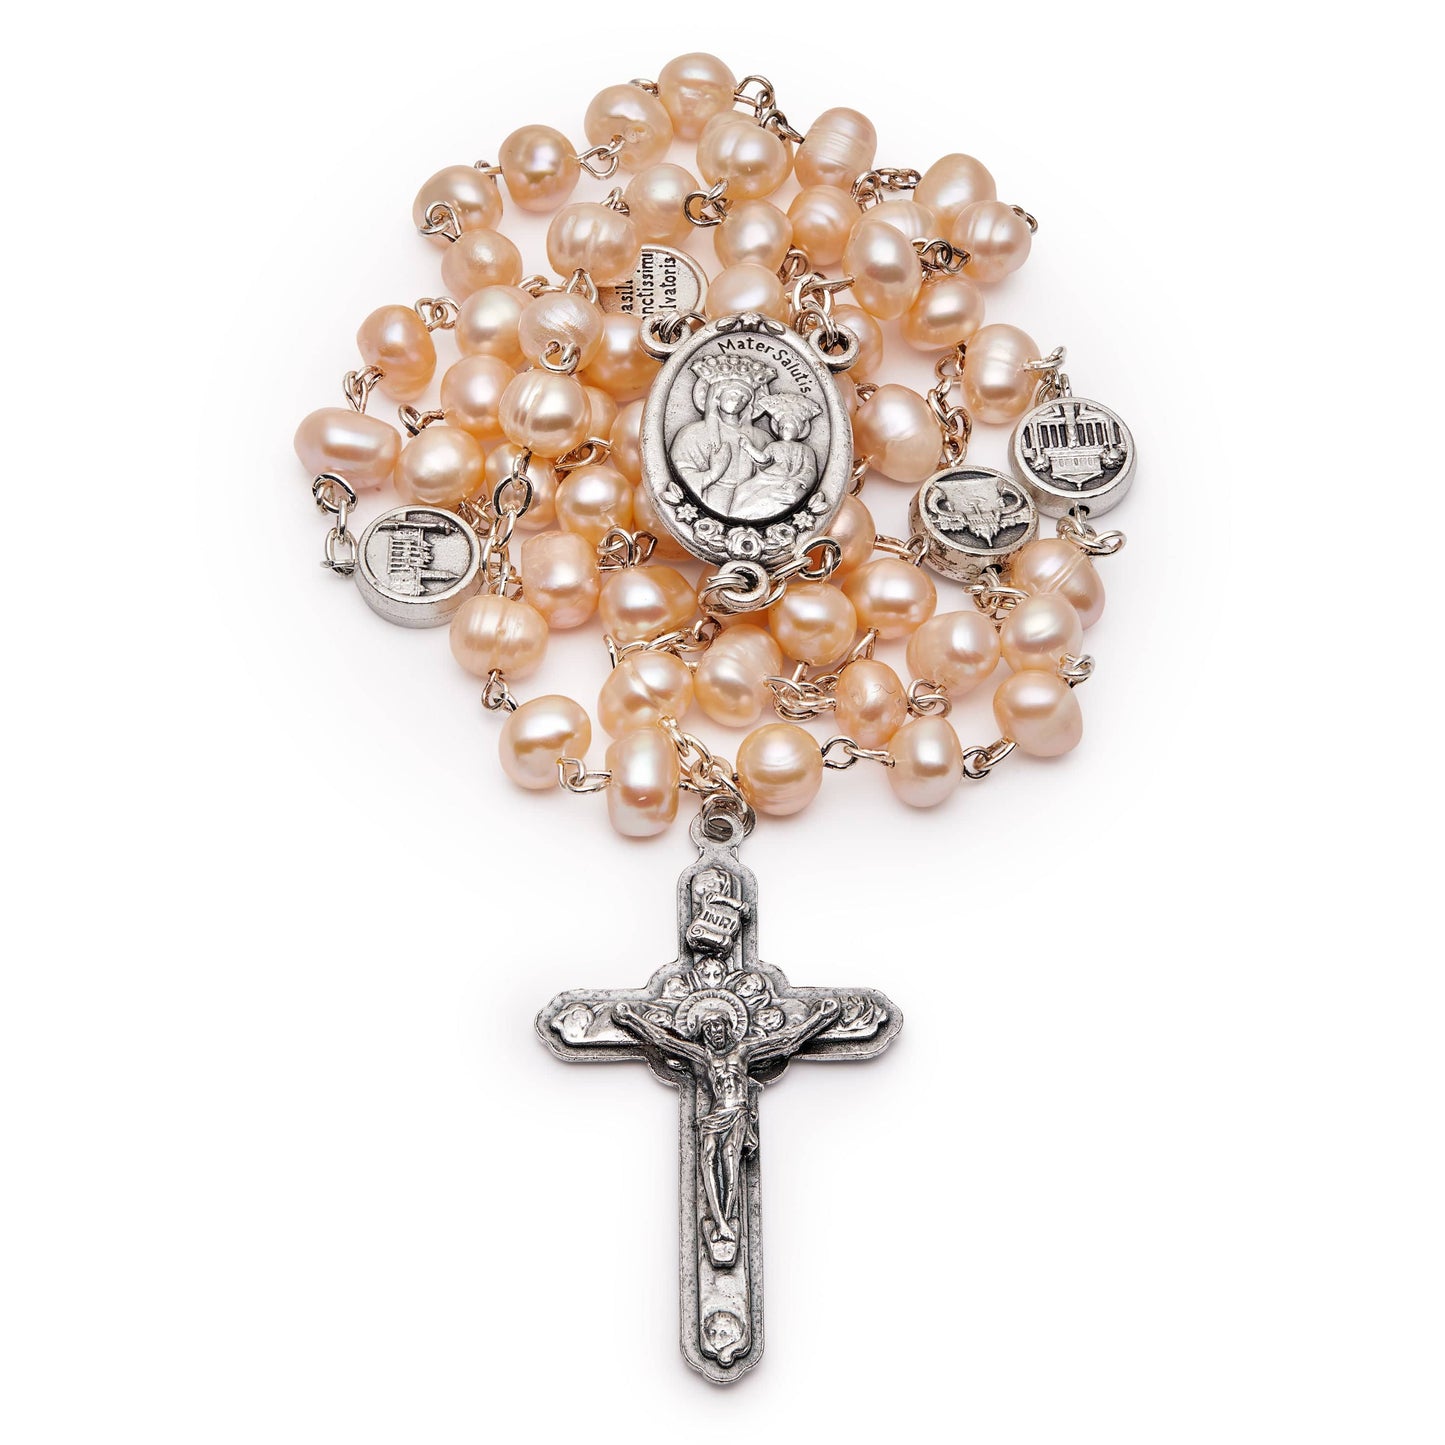 MONDO CATTOLICO Prayer Beads 51 cm (20.07 in) / 7 mm (0.27 in) Our Lady of Good Health Five Decades Rosary